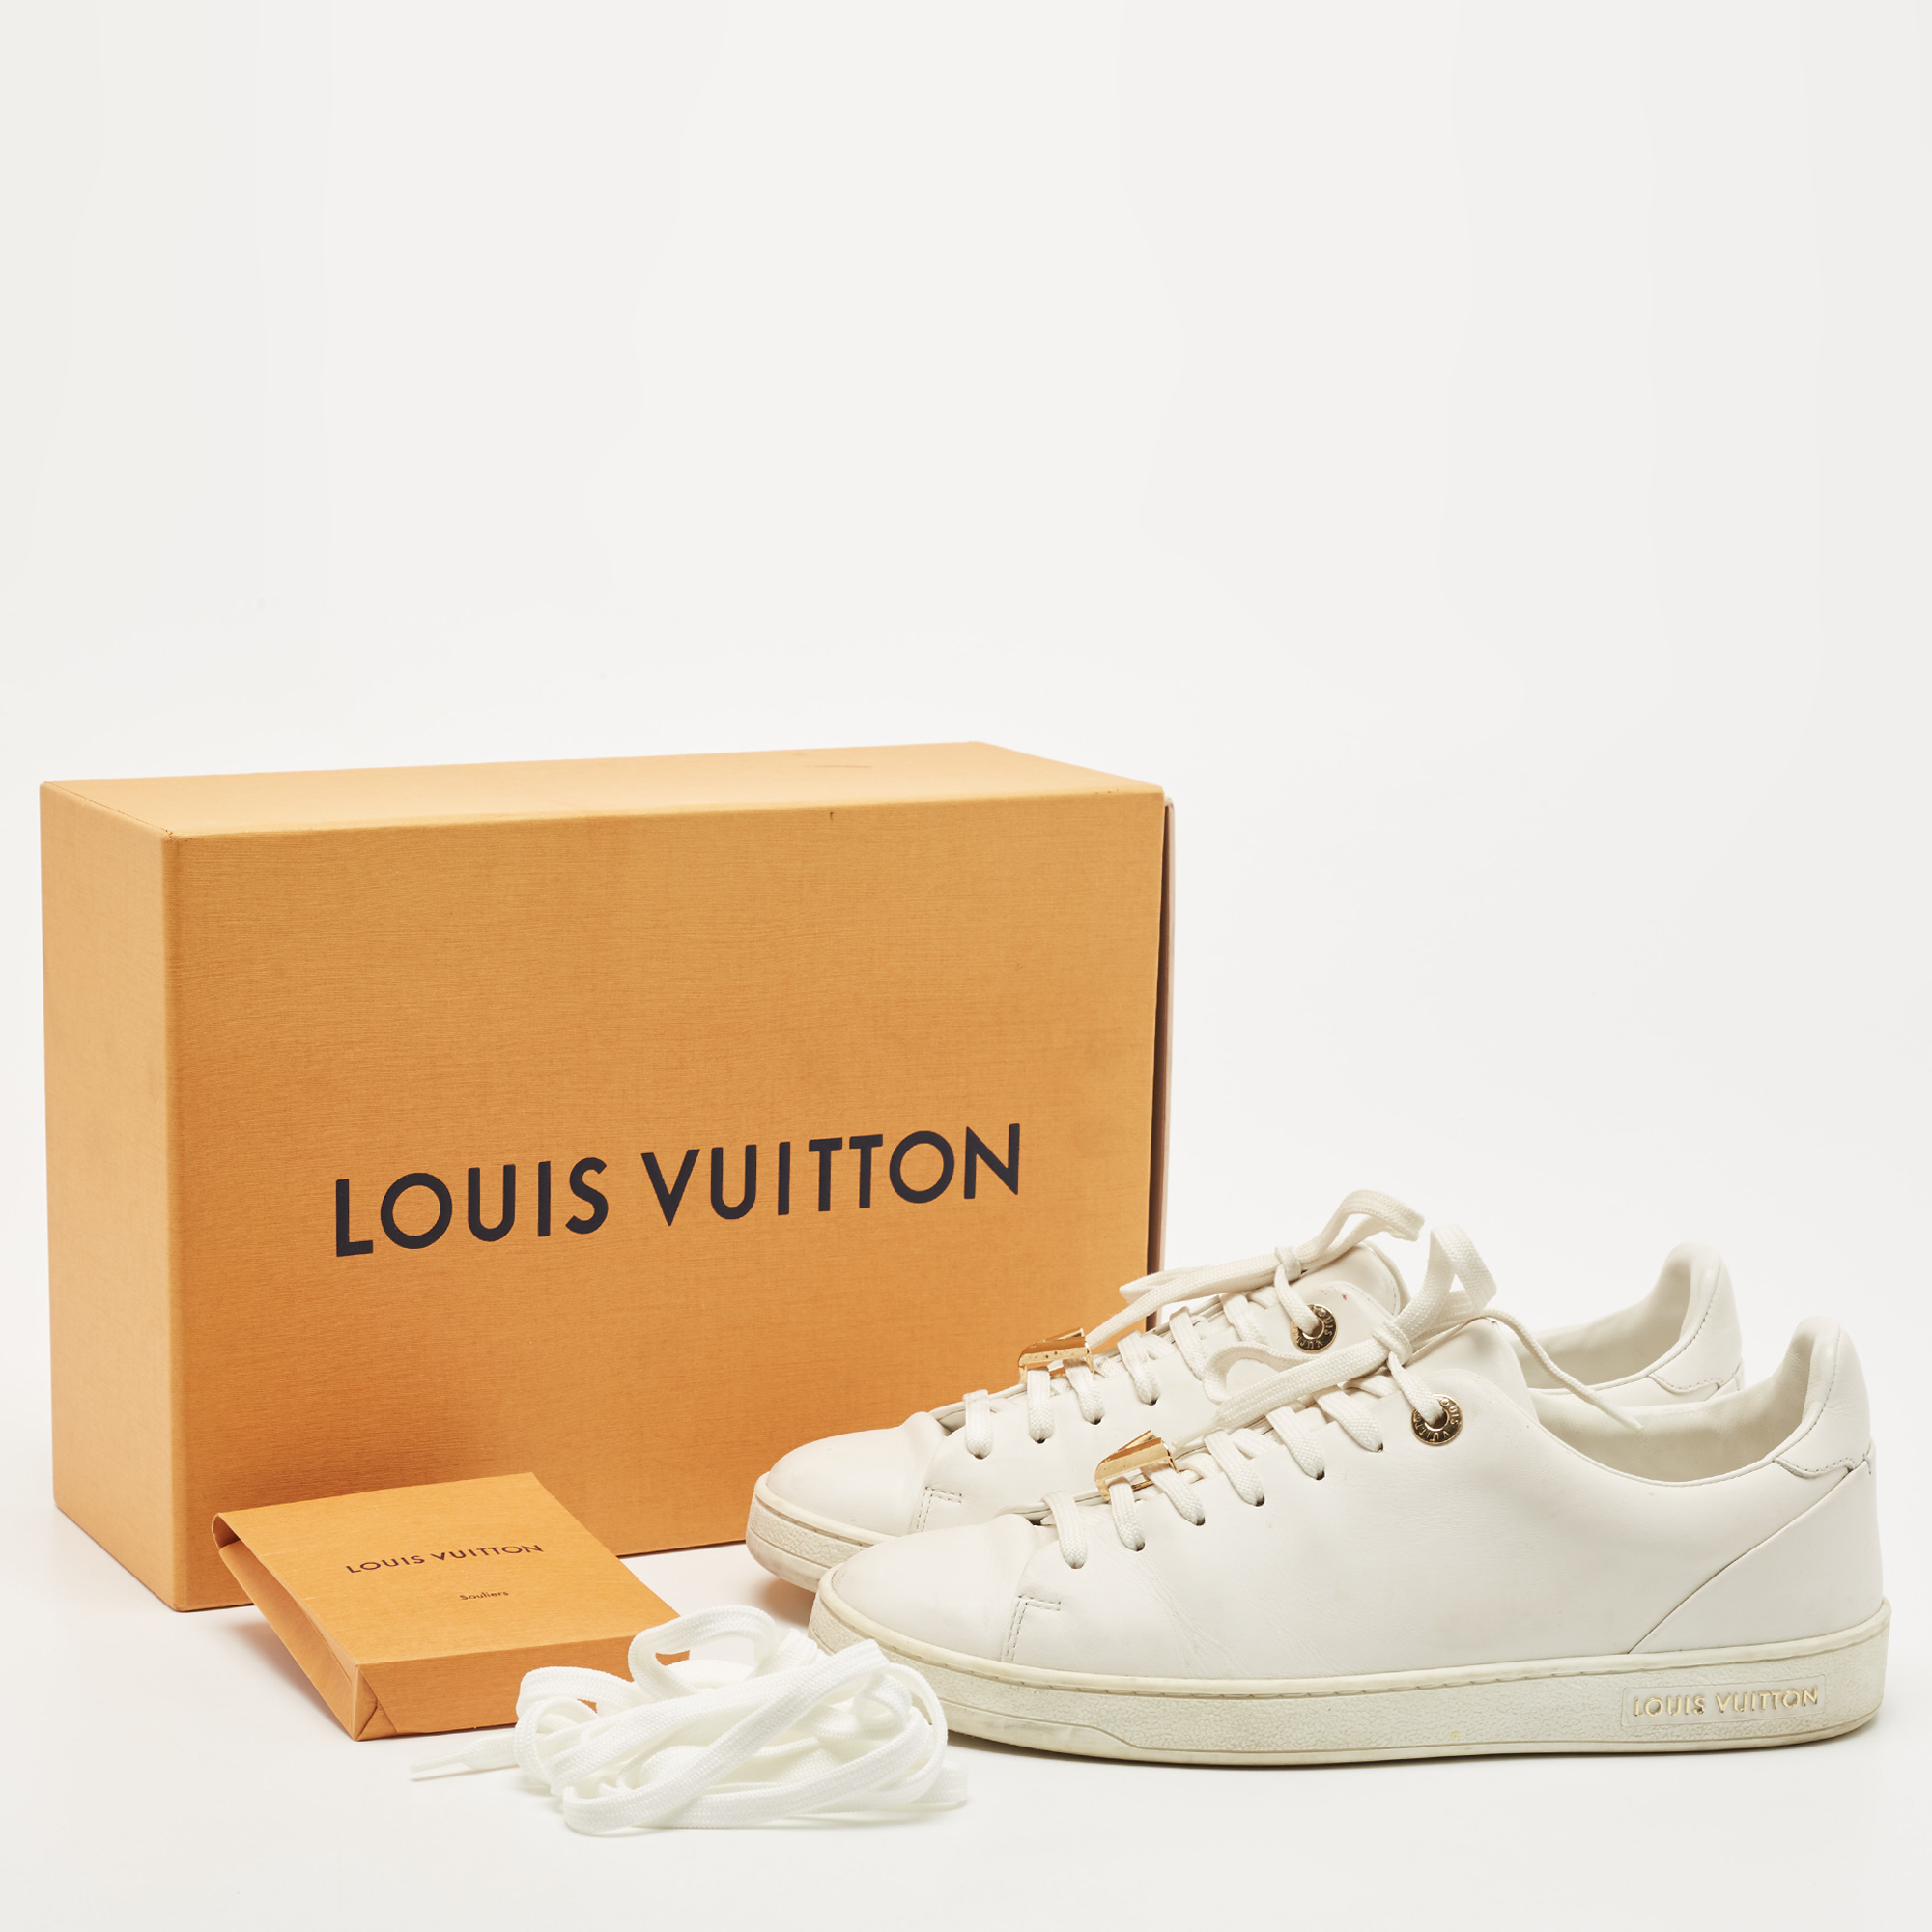 Louis Vuitton White Leather Frontrow Low Top Sneakers Size 37.5